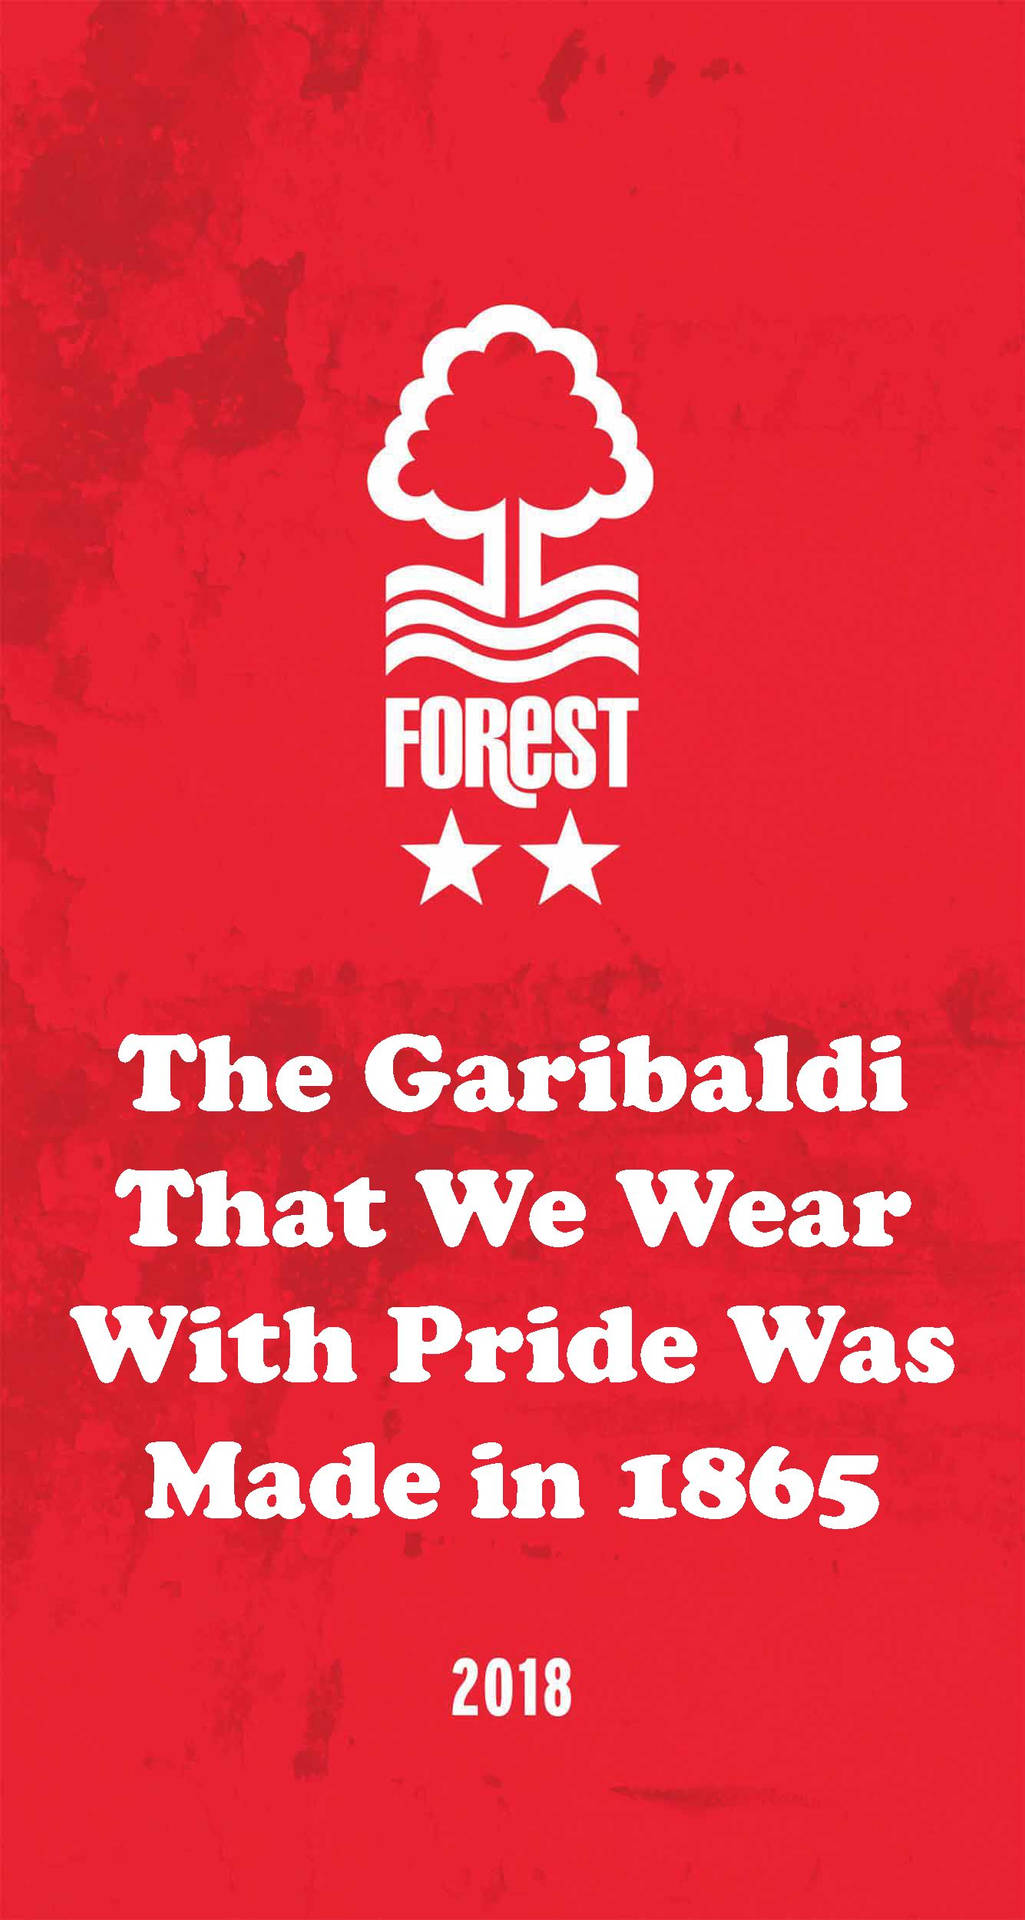 Enthralling view of the Nottingham Forest FC home ground with the Garibaldi signature reds prominently displayed. Wallpaper